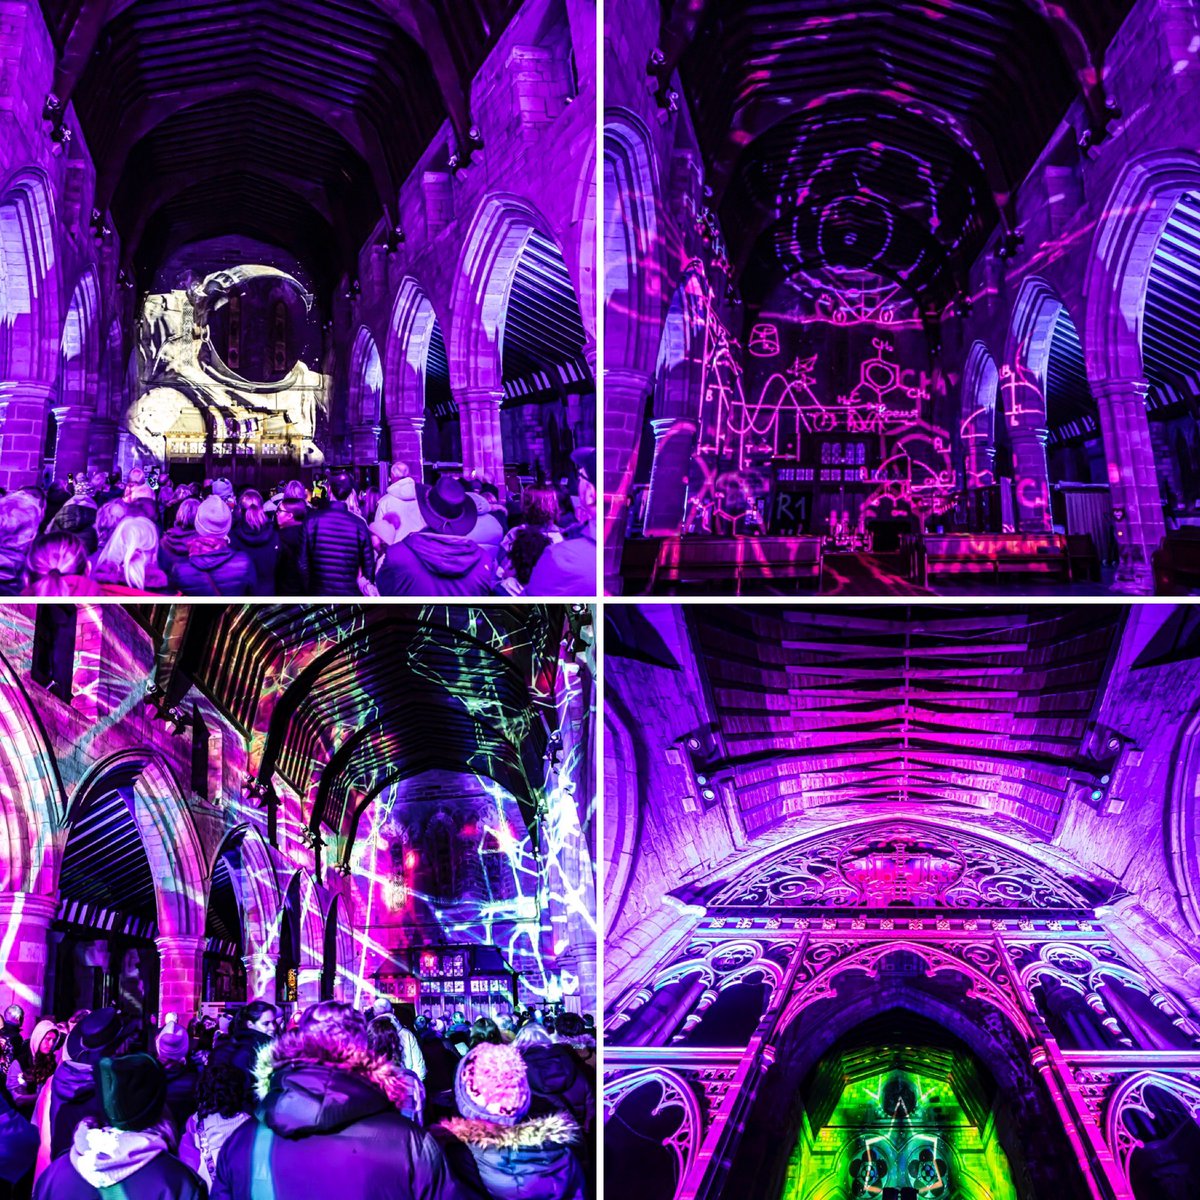 Thanks to everyone who visited #Space in St Bees Priory Church over the last couple of nights - a very special and intimate experience in stunning 900 year old church @CumberlandCoun @DiscoverCarlisl #ProjectionMapping #projectionart #sonetlumiere